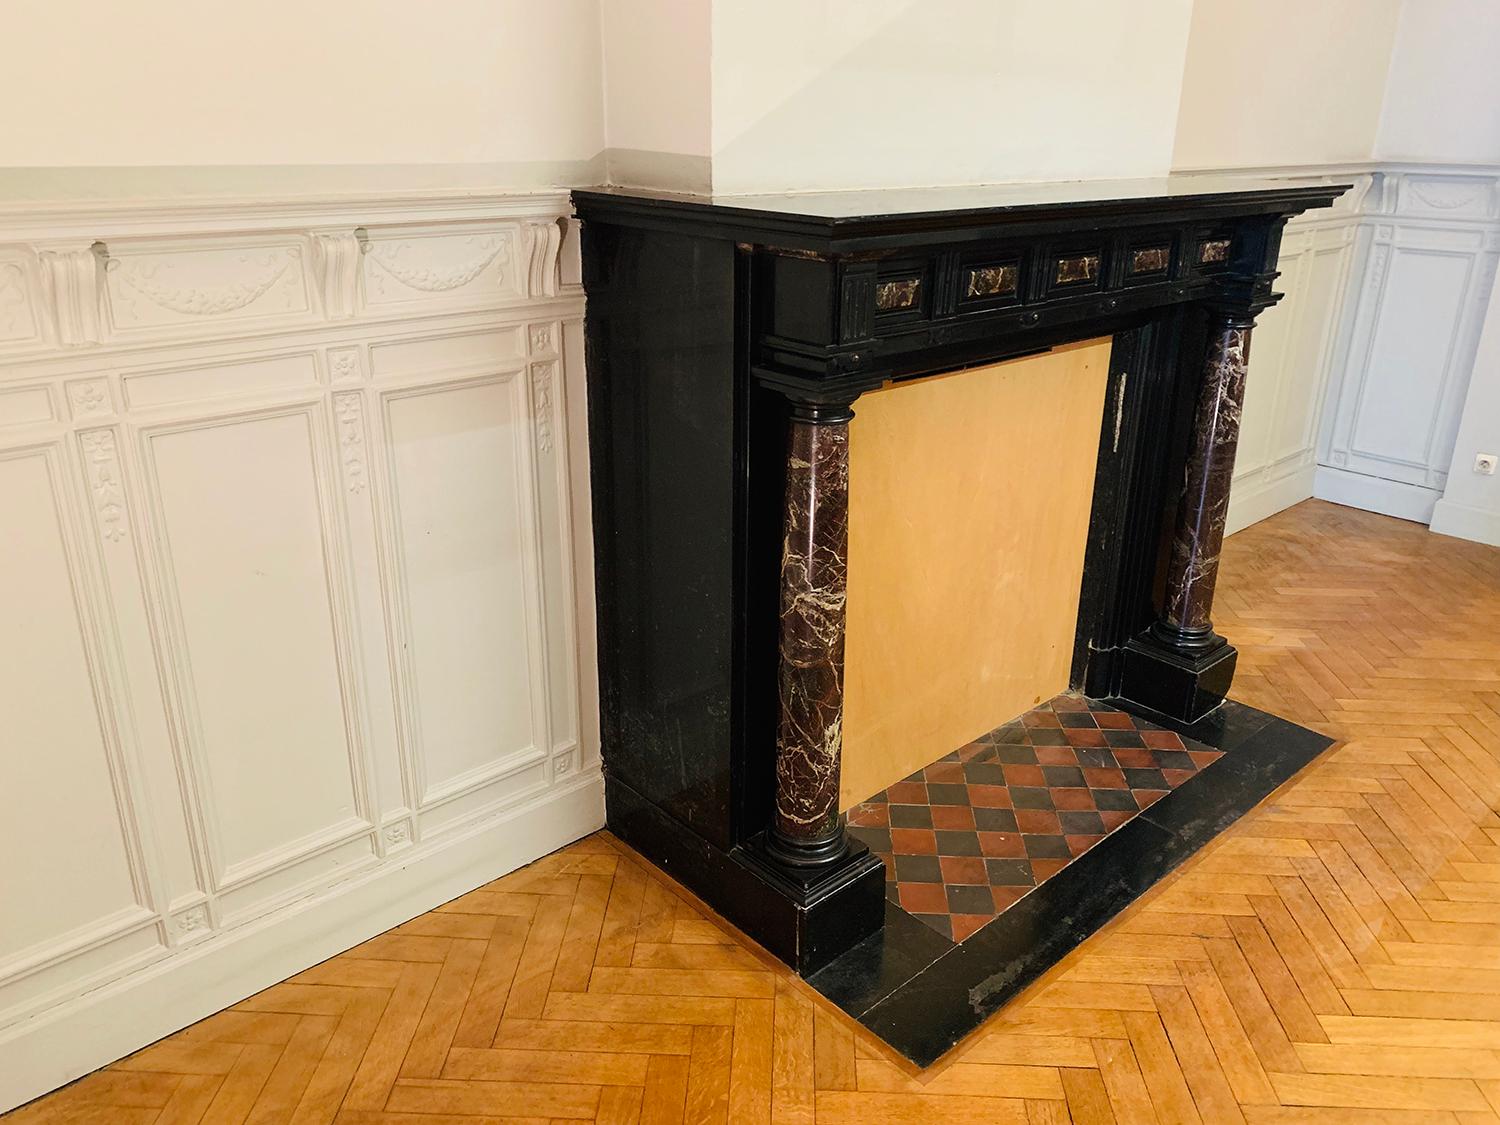 Splendid black and red marble fireplace, the columns in red marble columns are surmounted by a central shelf placed on a shaped and molded coat, this beautiful fireplace dates from the second half of the 19th century.

Splendide cheminée en marbre